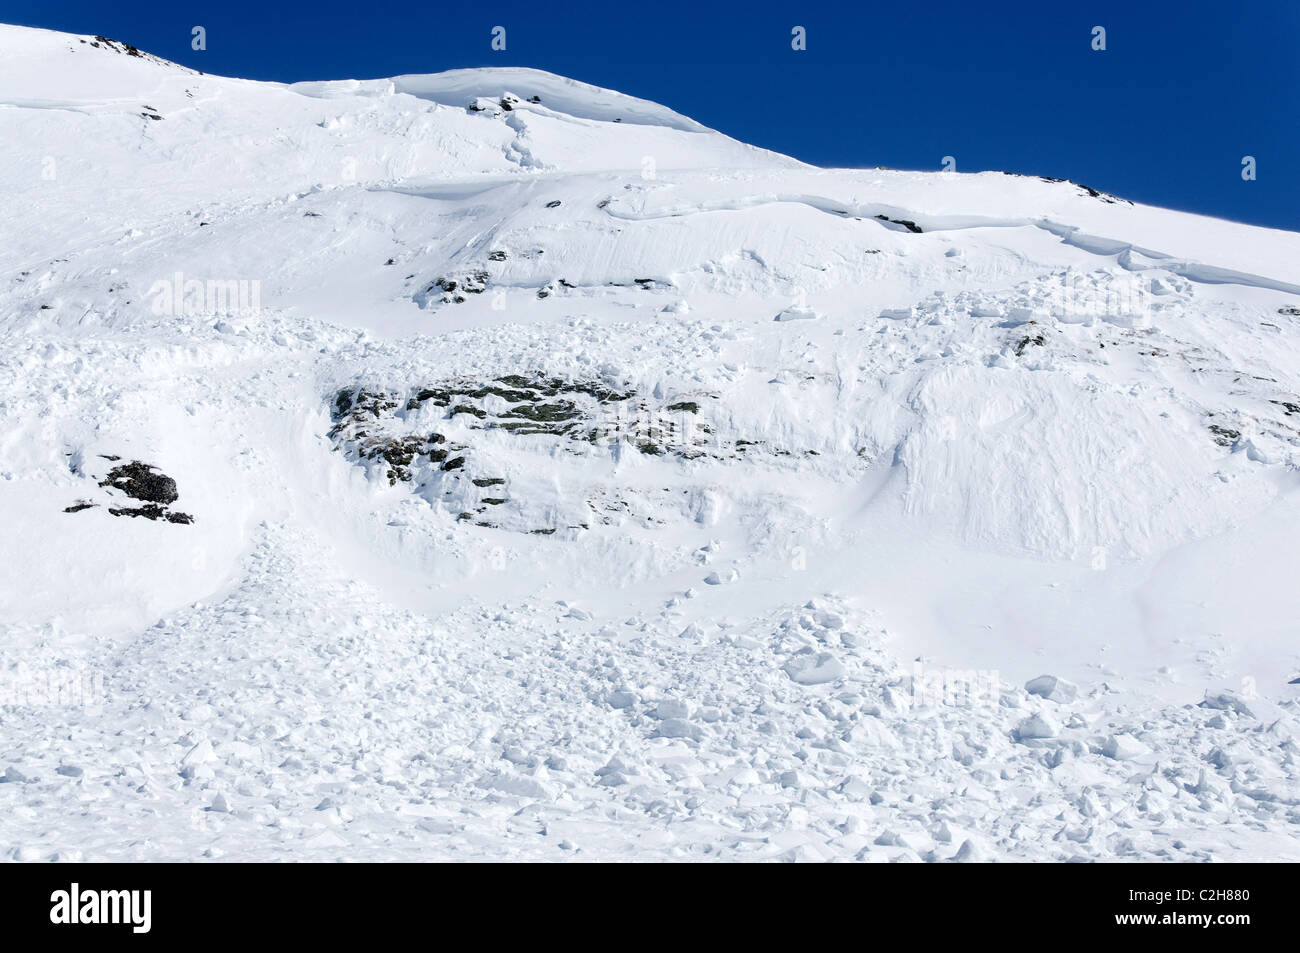 Windslab avalanche and debris in the Haute Maurienne, French Alps. Stock Photo